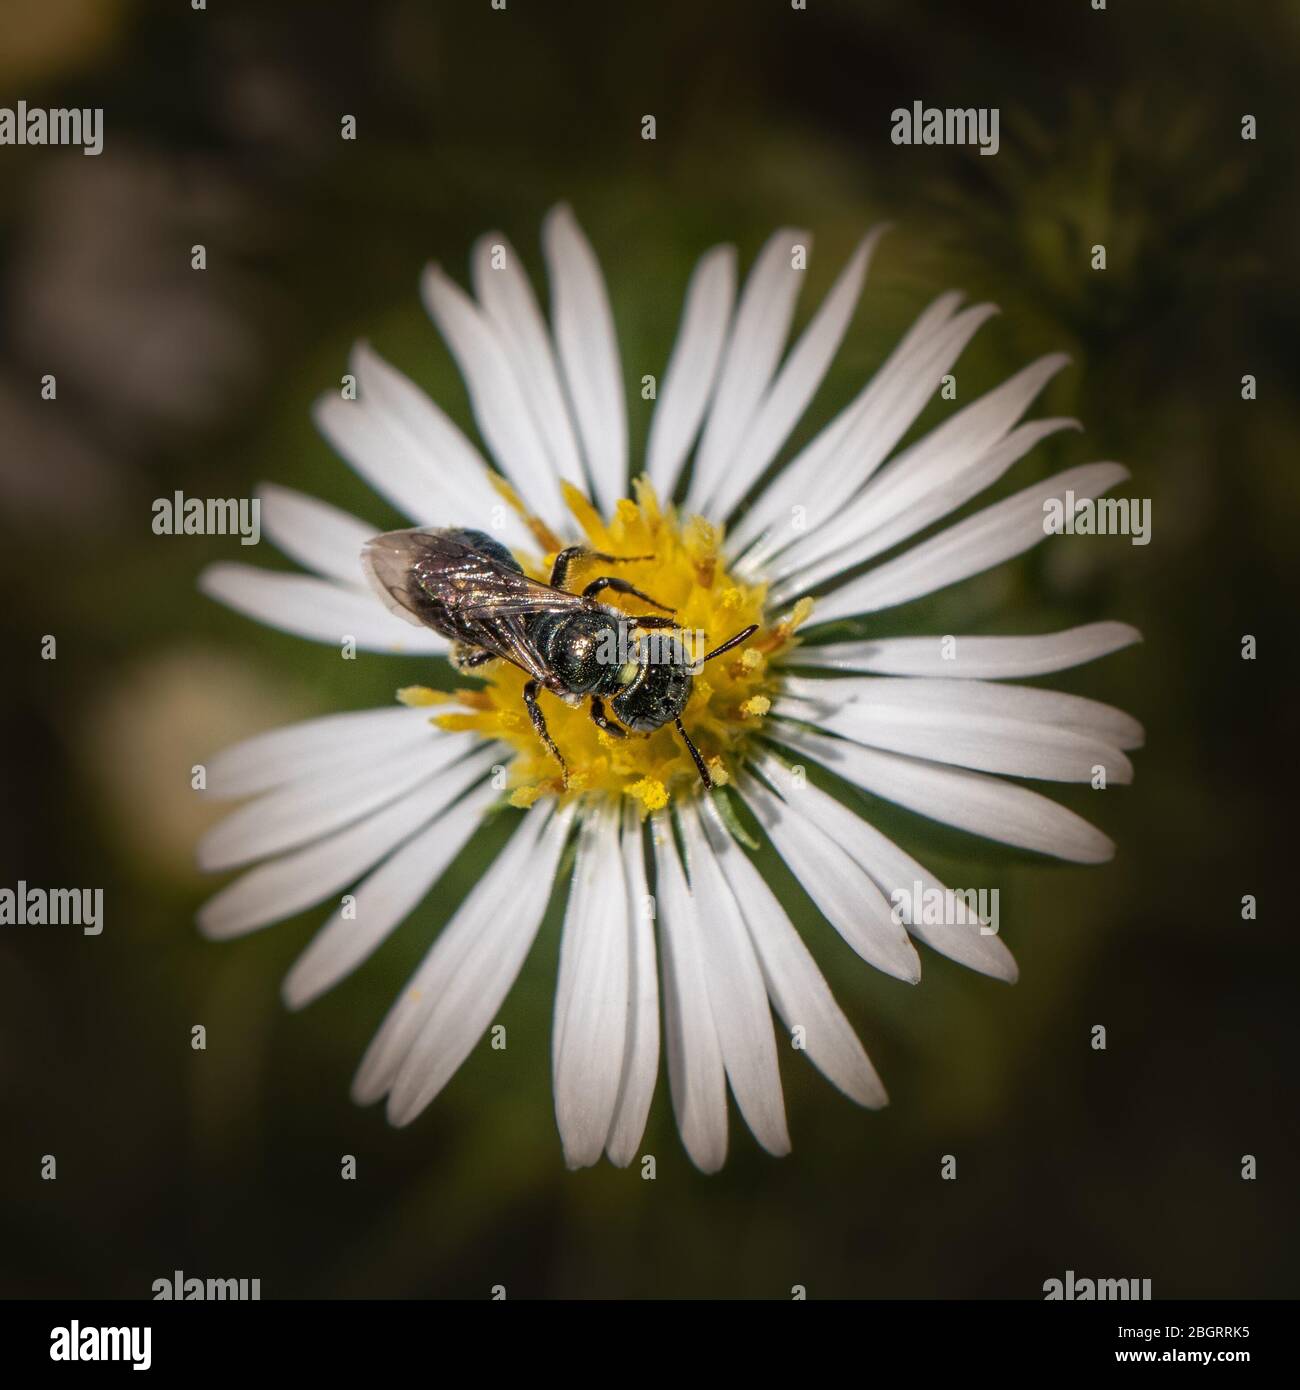 A sweat bee feeds on a white daisy with a yellow center Stock Photo